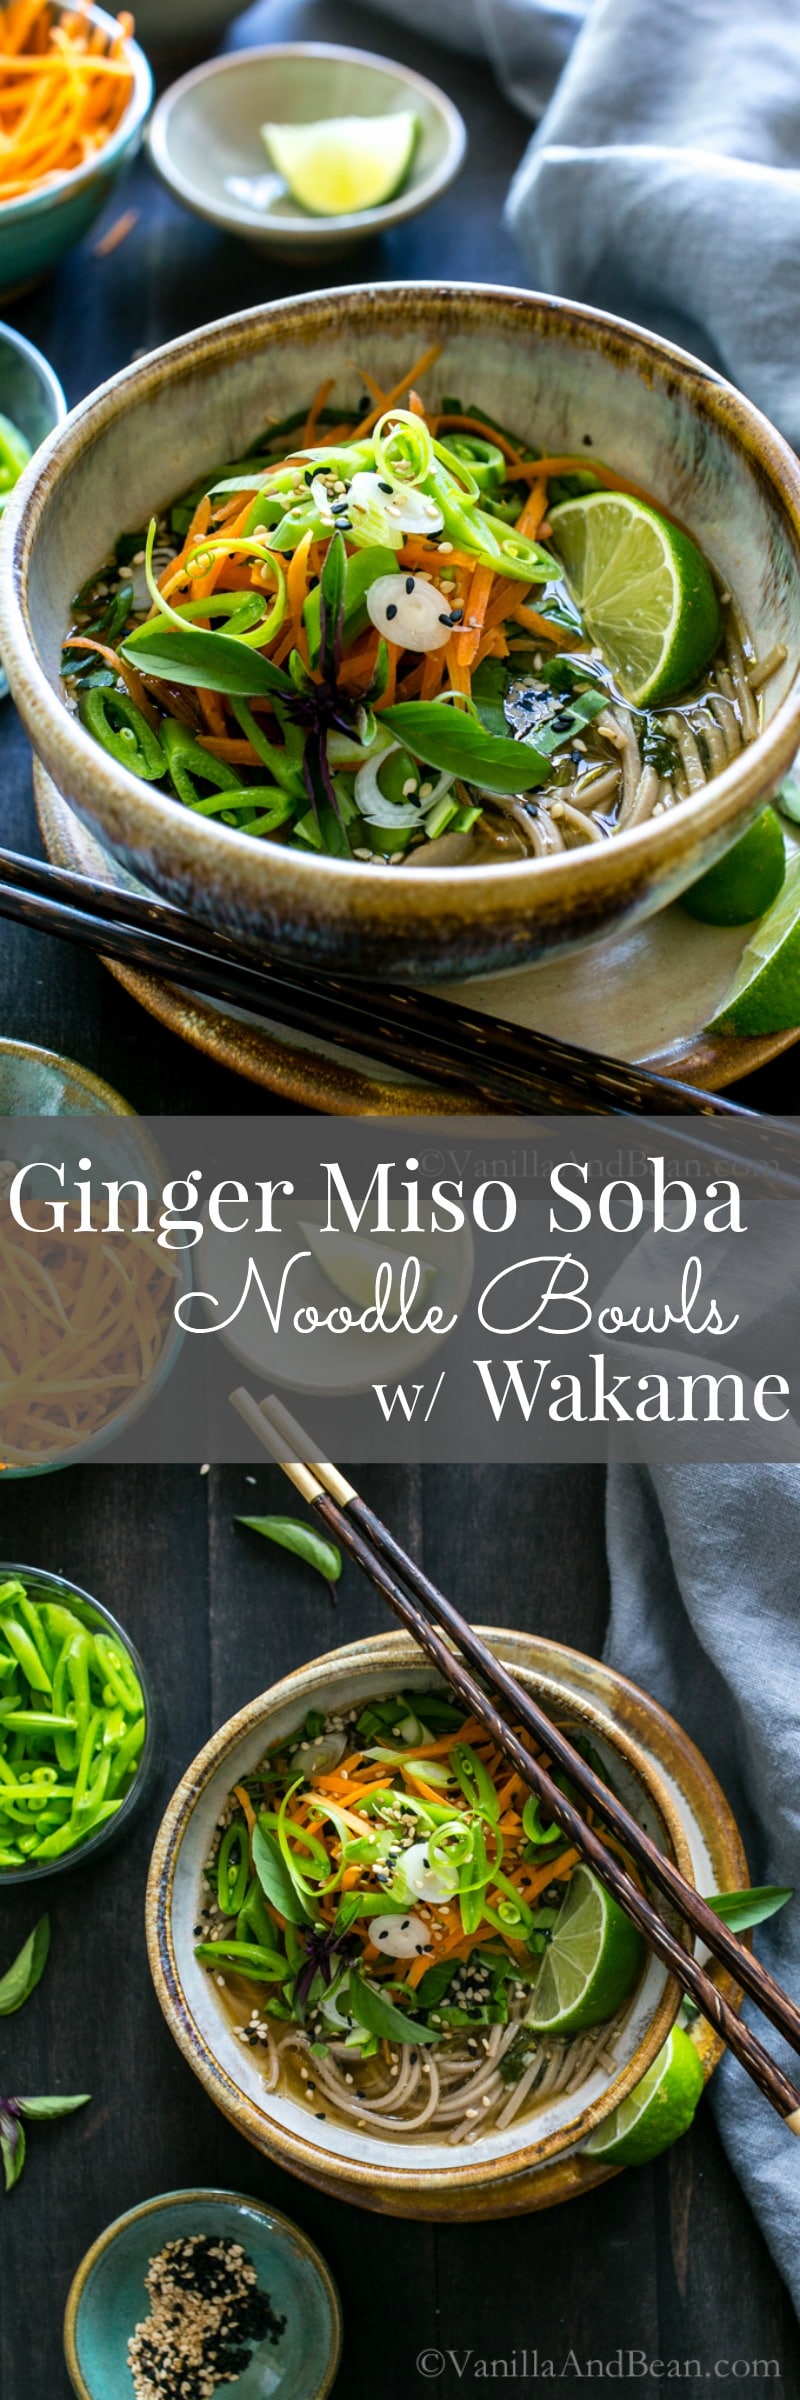 Warming and cozy, Ginger Miso Soba Noodle Bowls with Wakame are so comforting and can be adapted by changing the veggies with the seasons. Vegan + GF